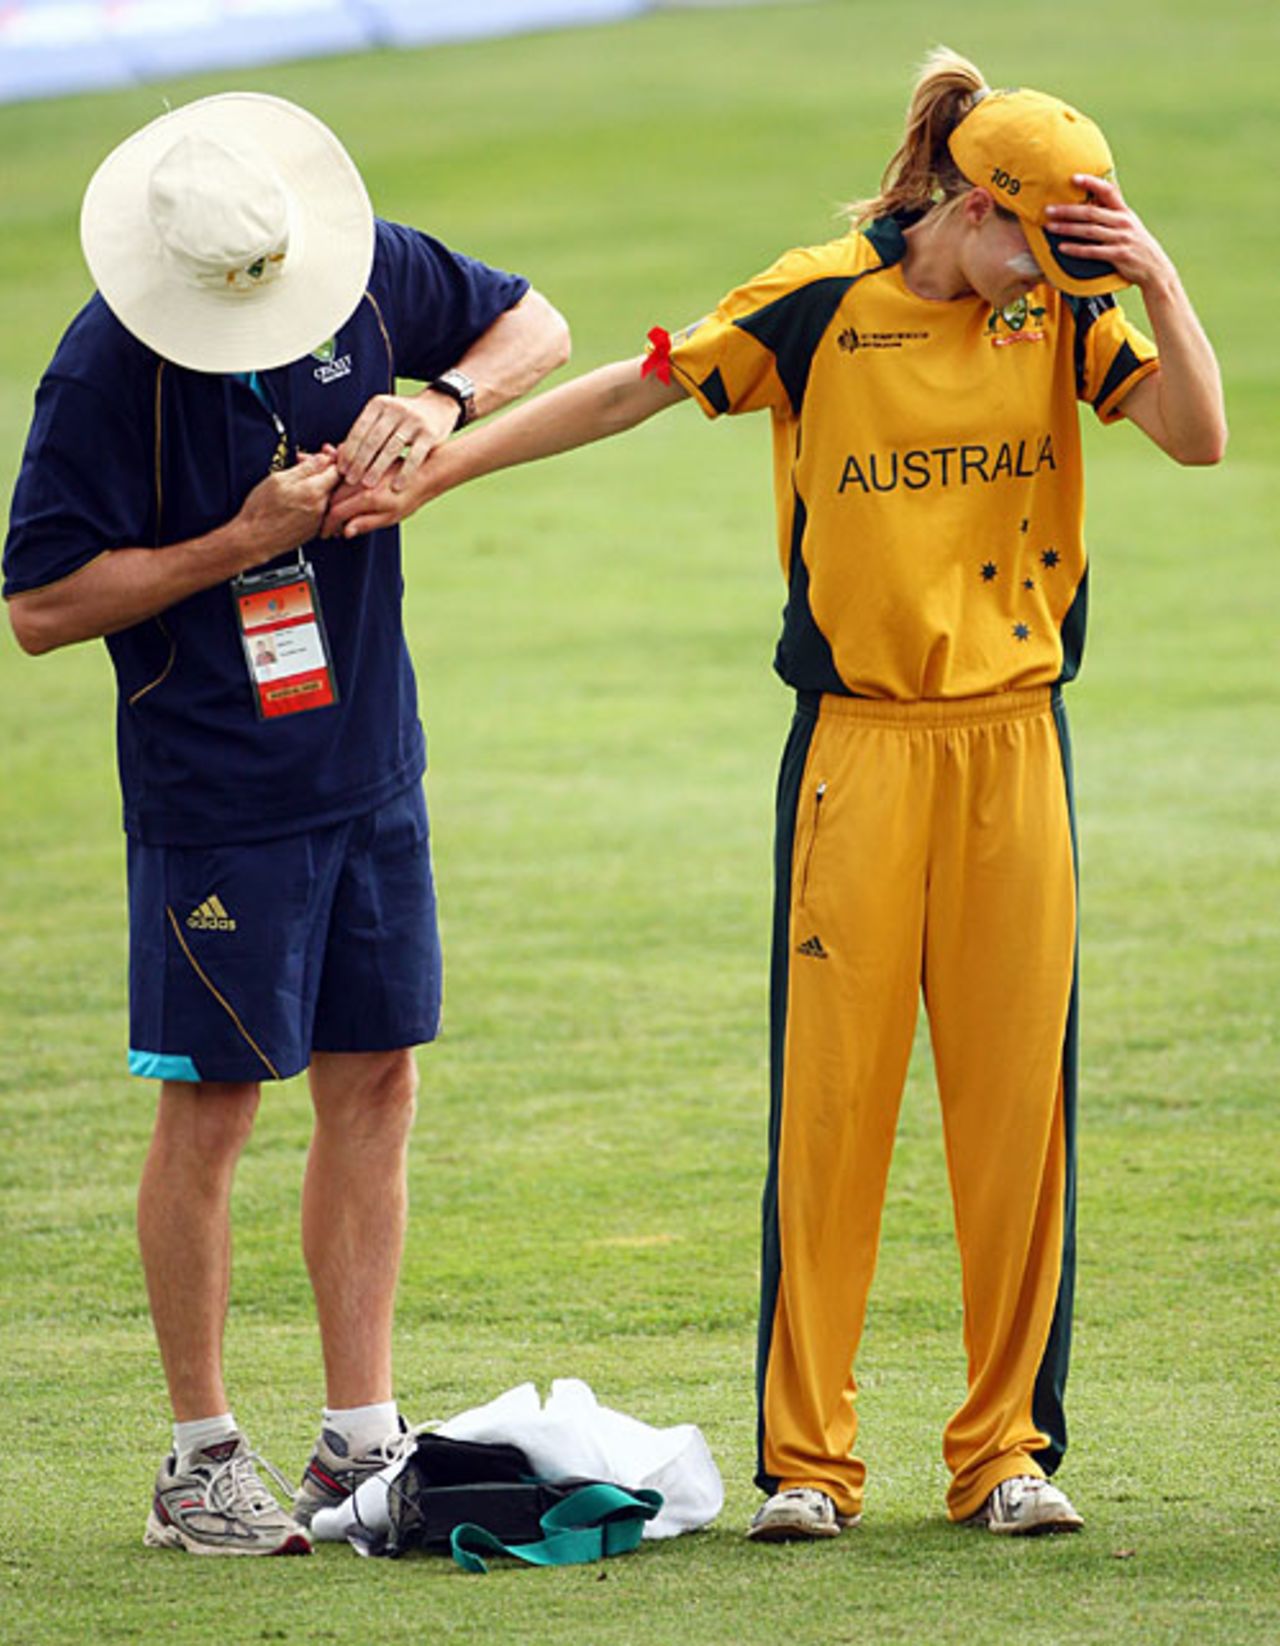 Australia's physio examines Ellyse Perry's injured finger, Australia v New Zealand, Group A, women's World Cup, North Sydney Oval, March 8, 2009